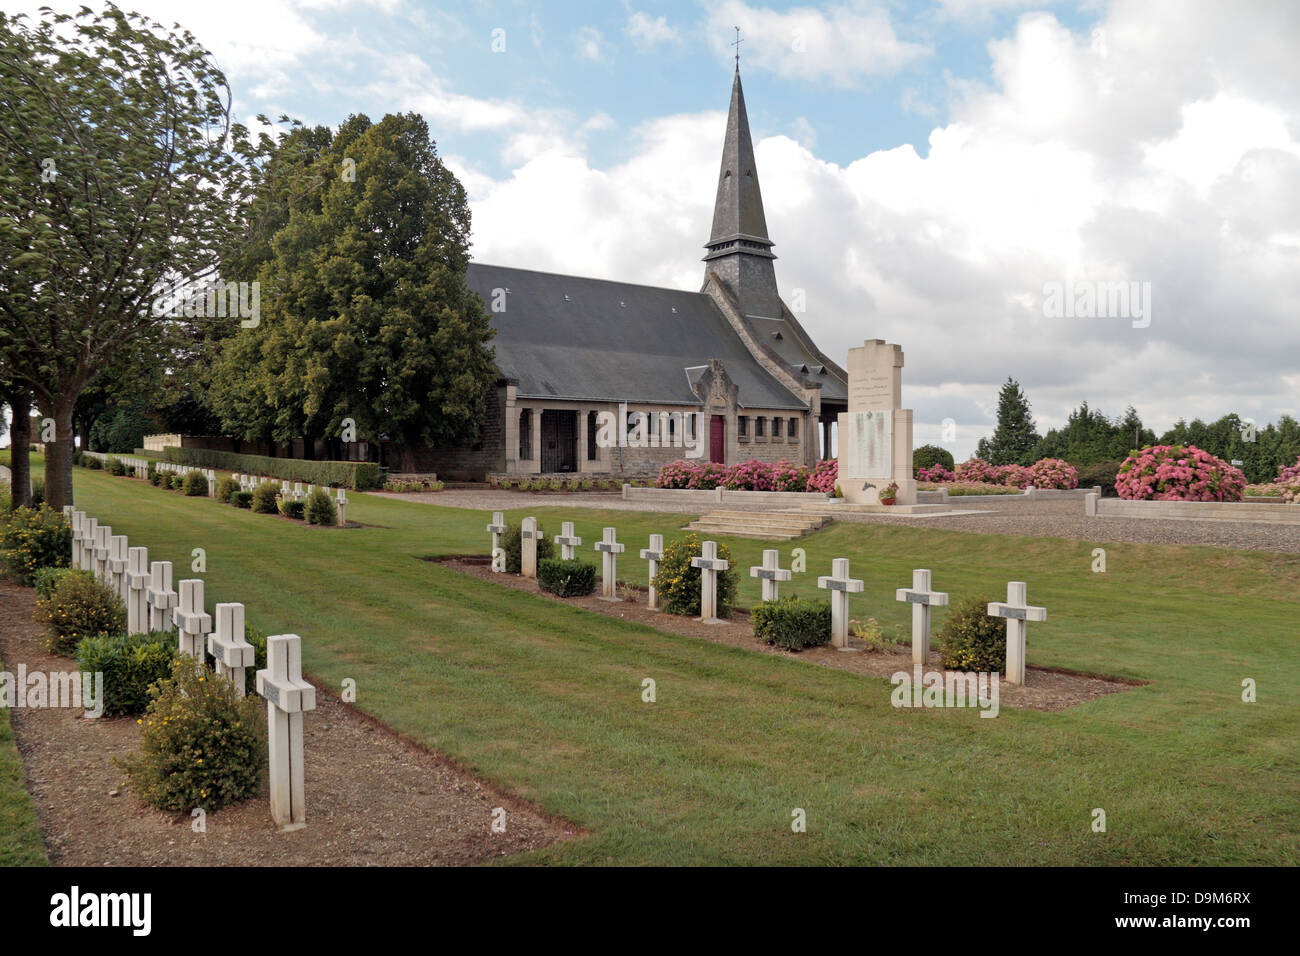 Souvenir Francais Chapel in front of the Rancourt French National Cemetery, Rancourt, Somme, Picardy, France. Stock Photo